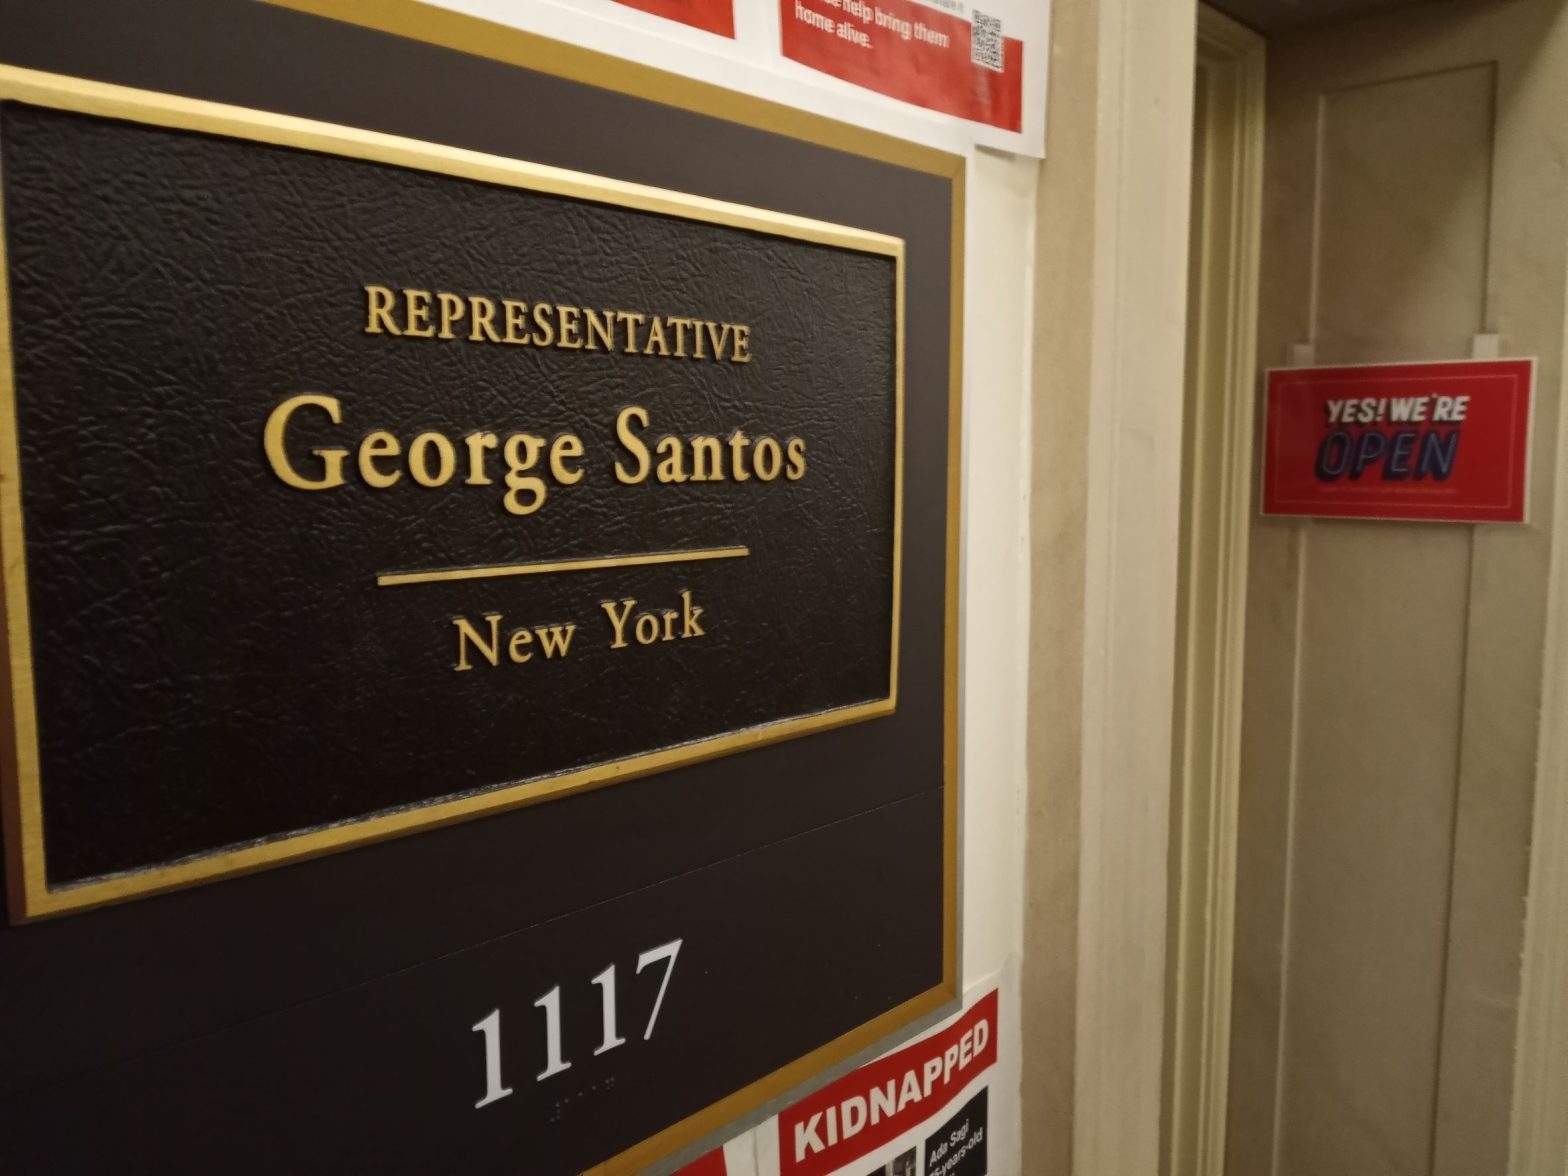 To hell with this place:' George Santos kicked out of Congress